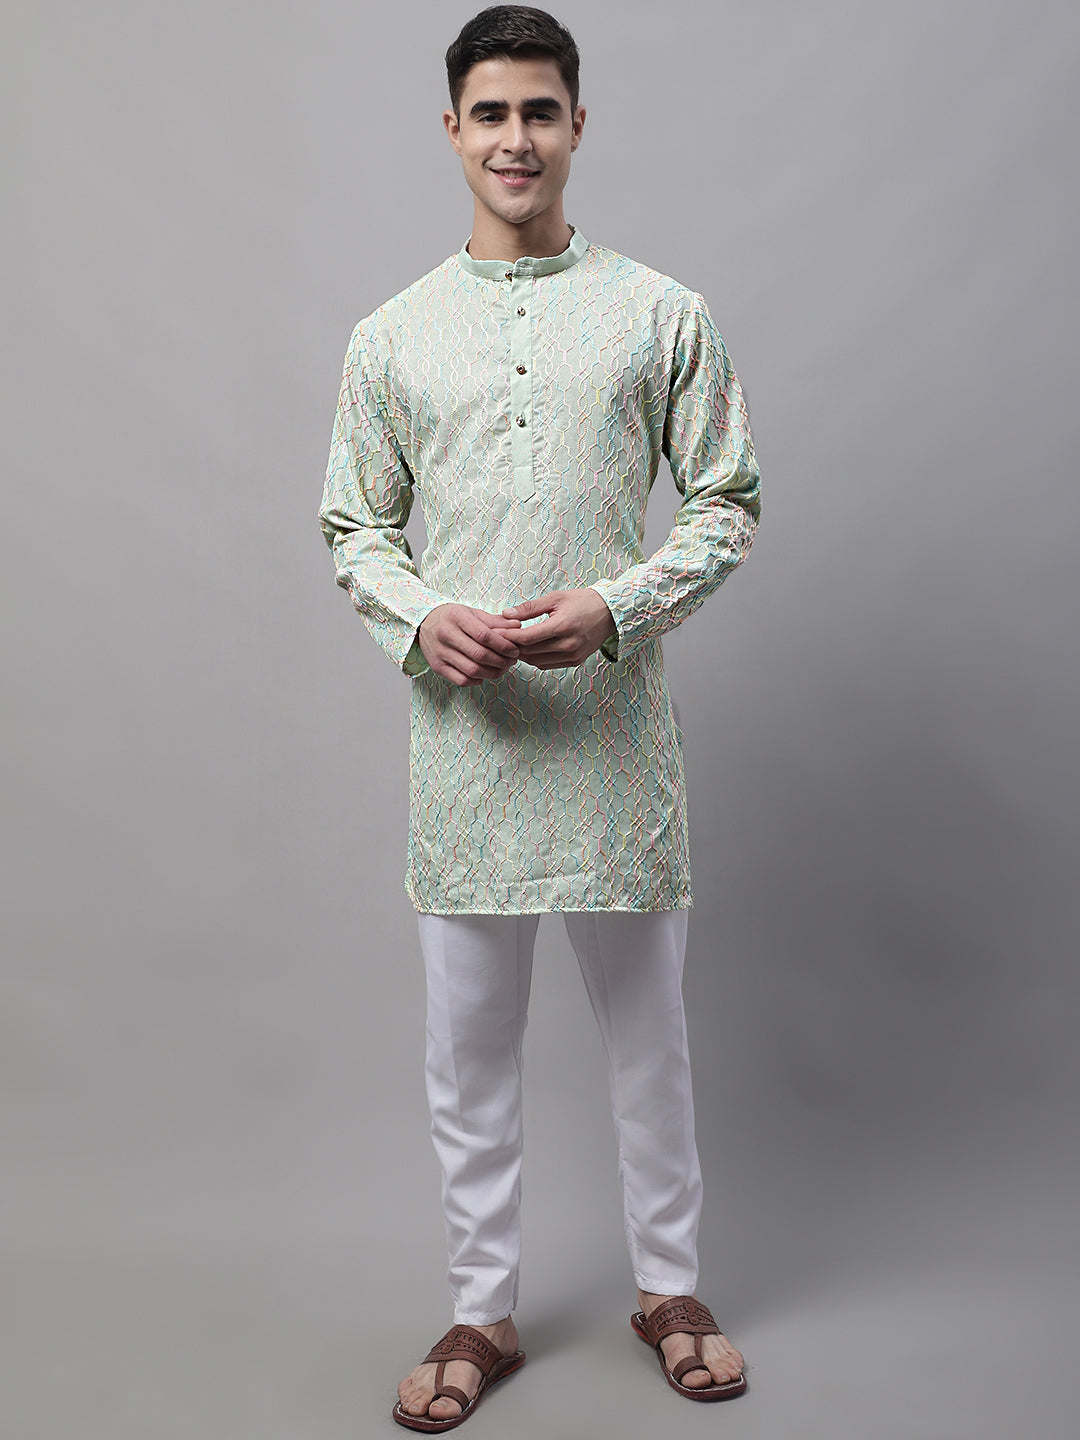 Men's Pista  Green and Multi Coloured Embroidered Straight Kurtas